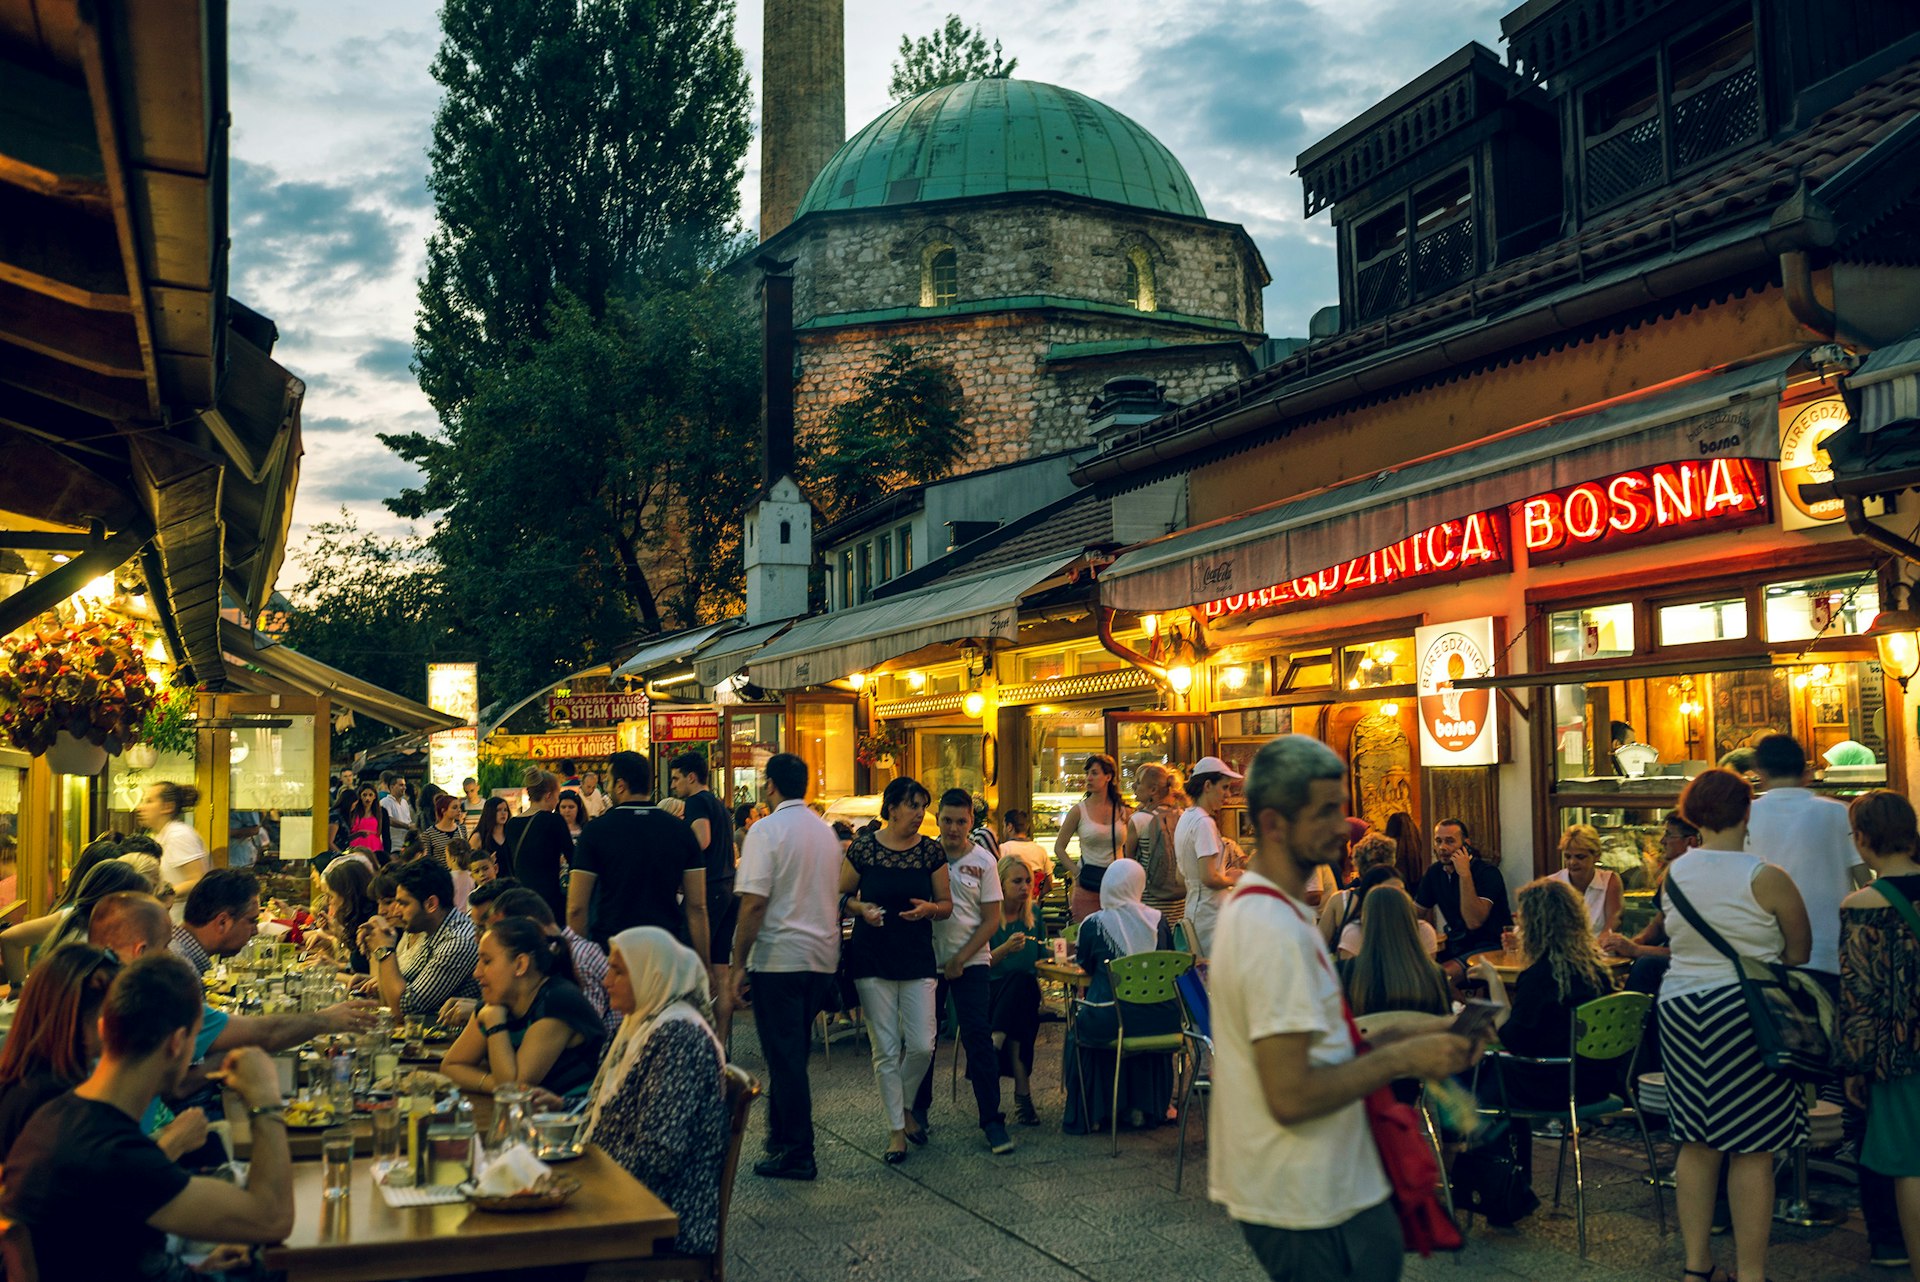 People gather at tables outside restaurants for a meal as the sun sets during Ramadan